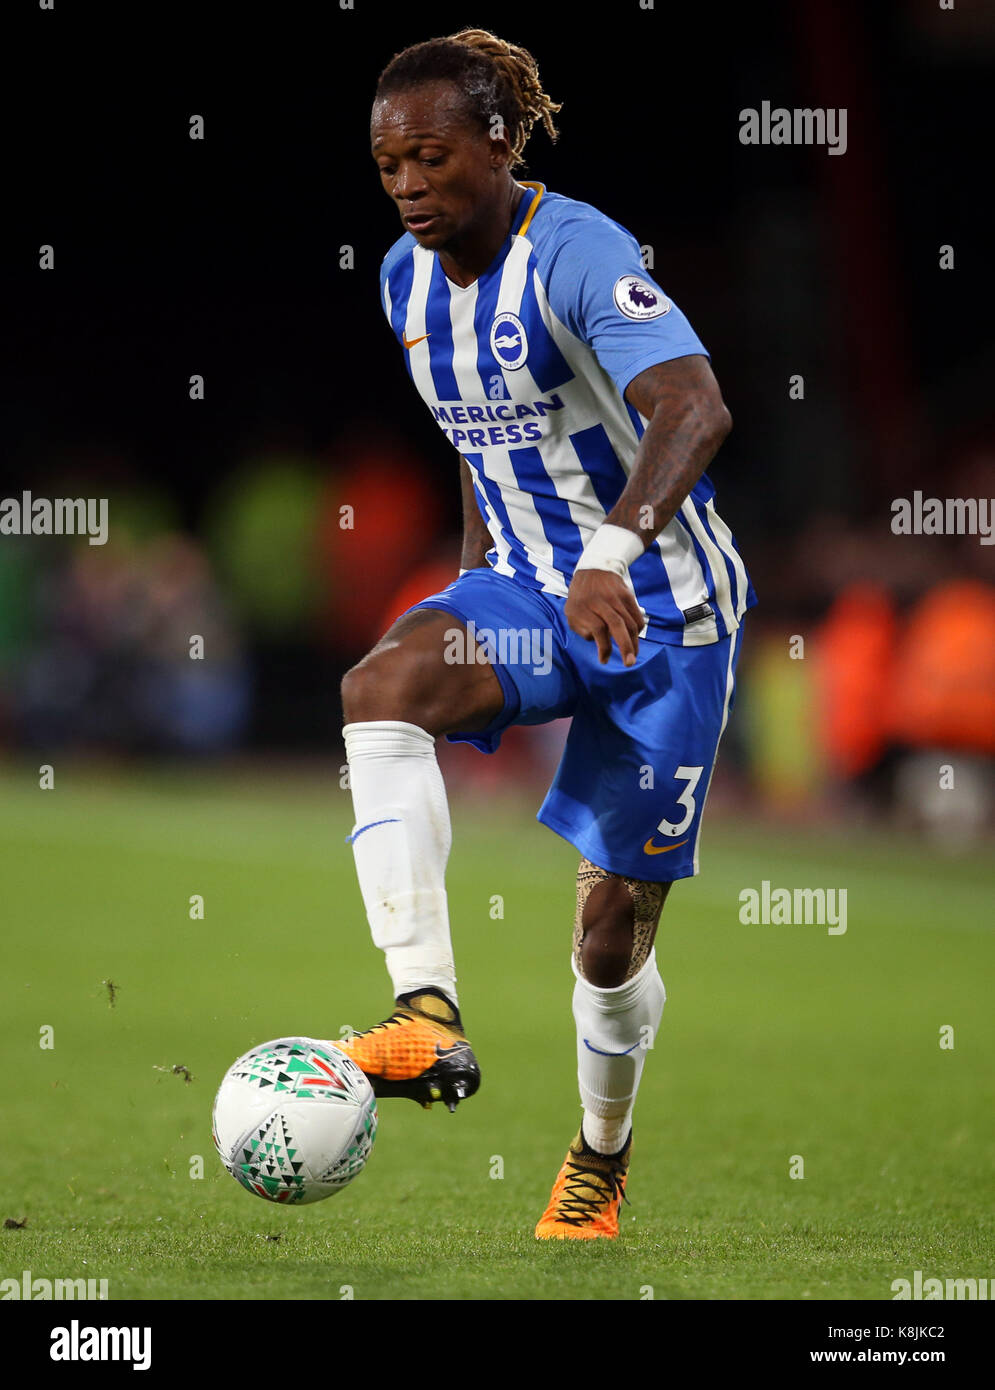 Brighton and Hove Albion Gaetan Bong in action during the Carabao Cup, third round match at the Vitality Stadium, Bournemouth. PRESS ASSOCIATION Photo. Picture date: Tuesday September 19, 2017. See PA story SOCCER Bournemouth. Photo credit should read: Steven Paston/PA Wire. RESTRICTIONS: No use with unauthorised audio, video, data, fixture lists, club/league logos or 'live' services. Online in-match use limited to 75 images, no video emulation. No use in betting, games or single club/league/player publications. Stock Photo